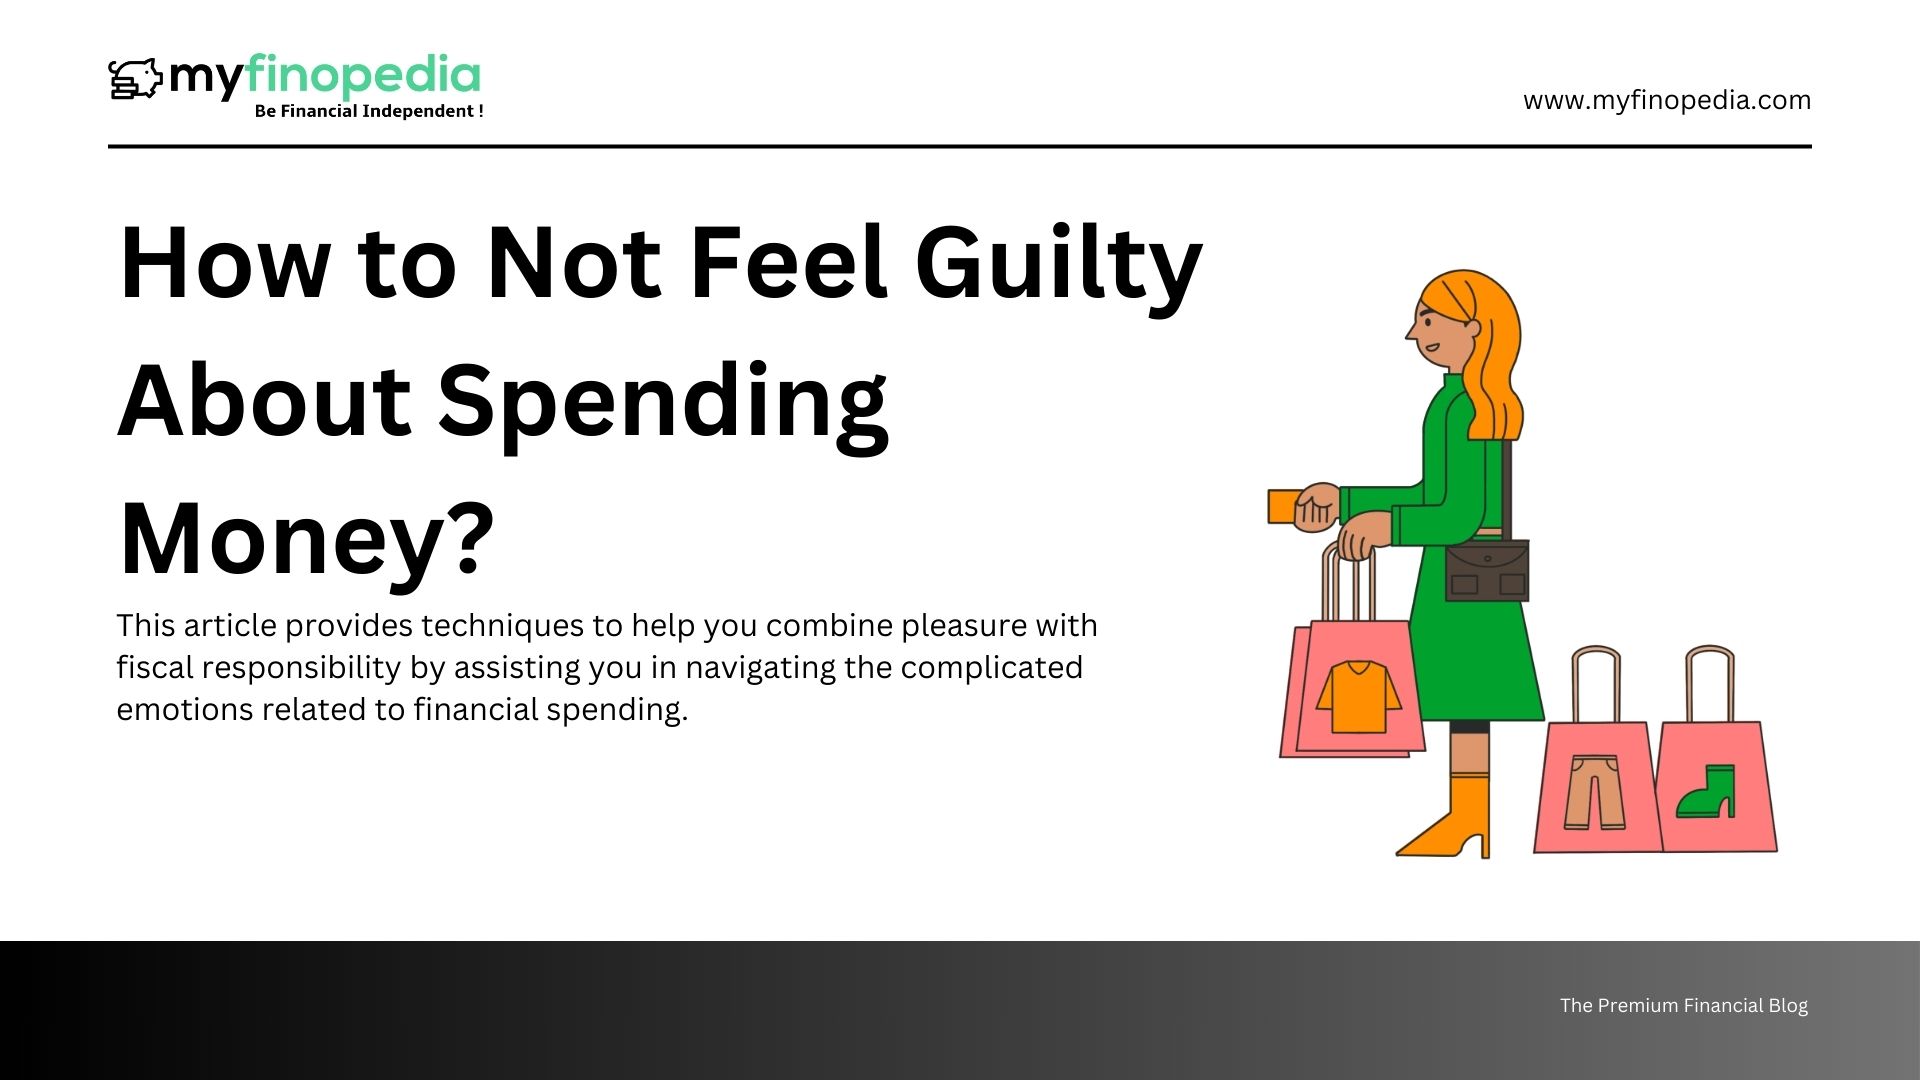 How to Not Feel Guilty About Spending Money